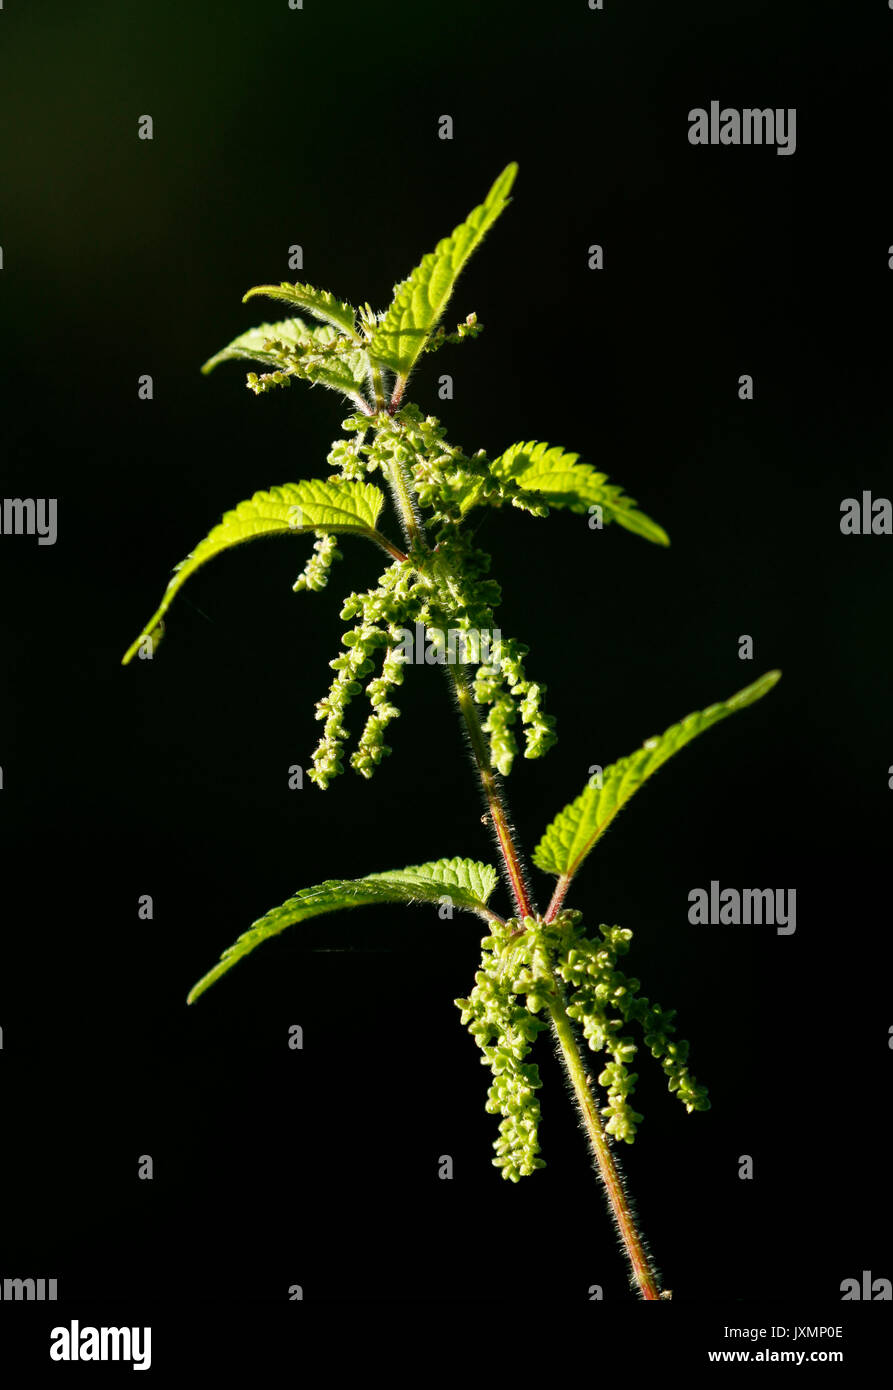 Single nettle, Urtica dioica, against black background. Stock Photo